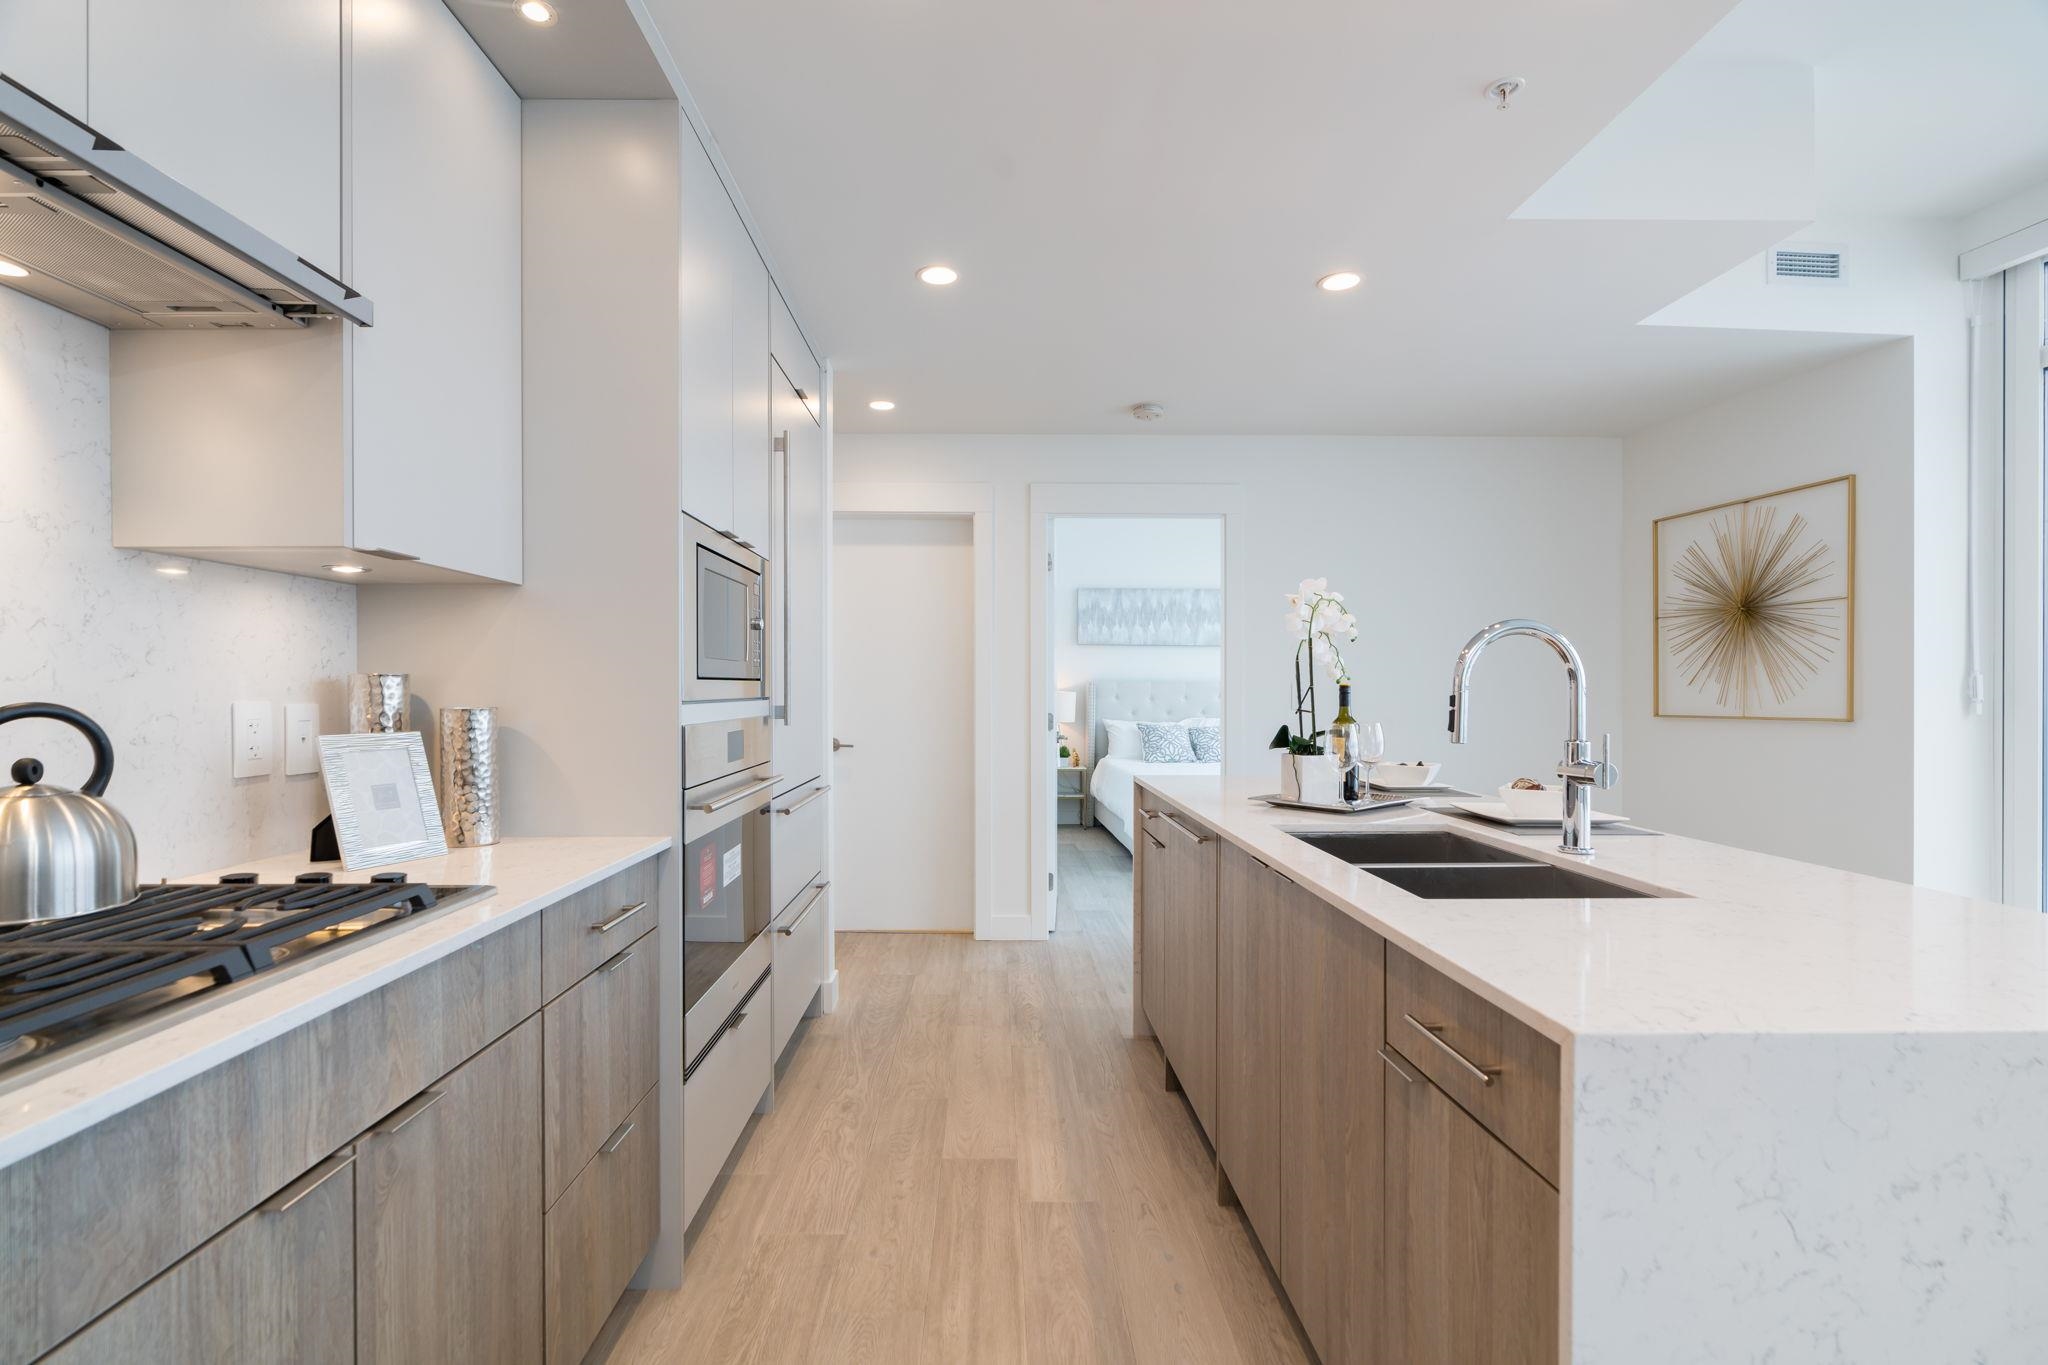 Listing image of 501 7638 CAMBIE STREET